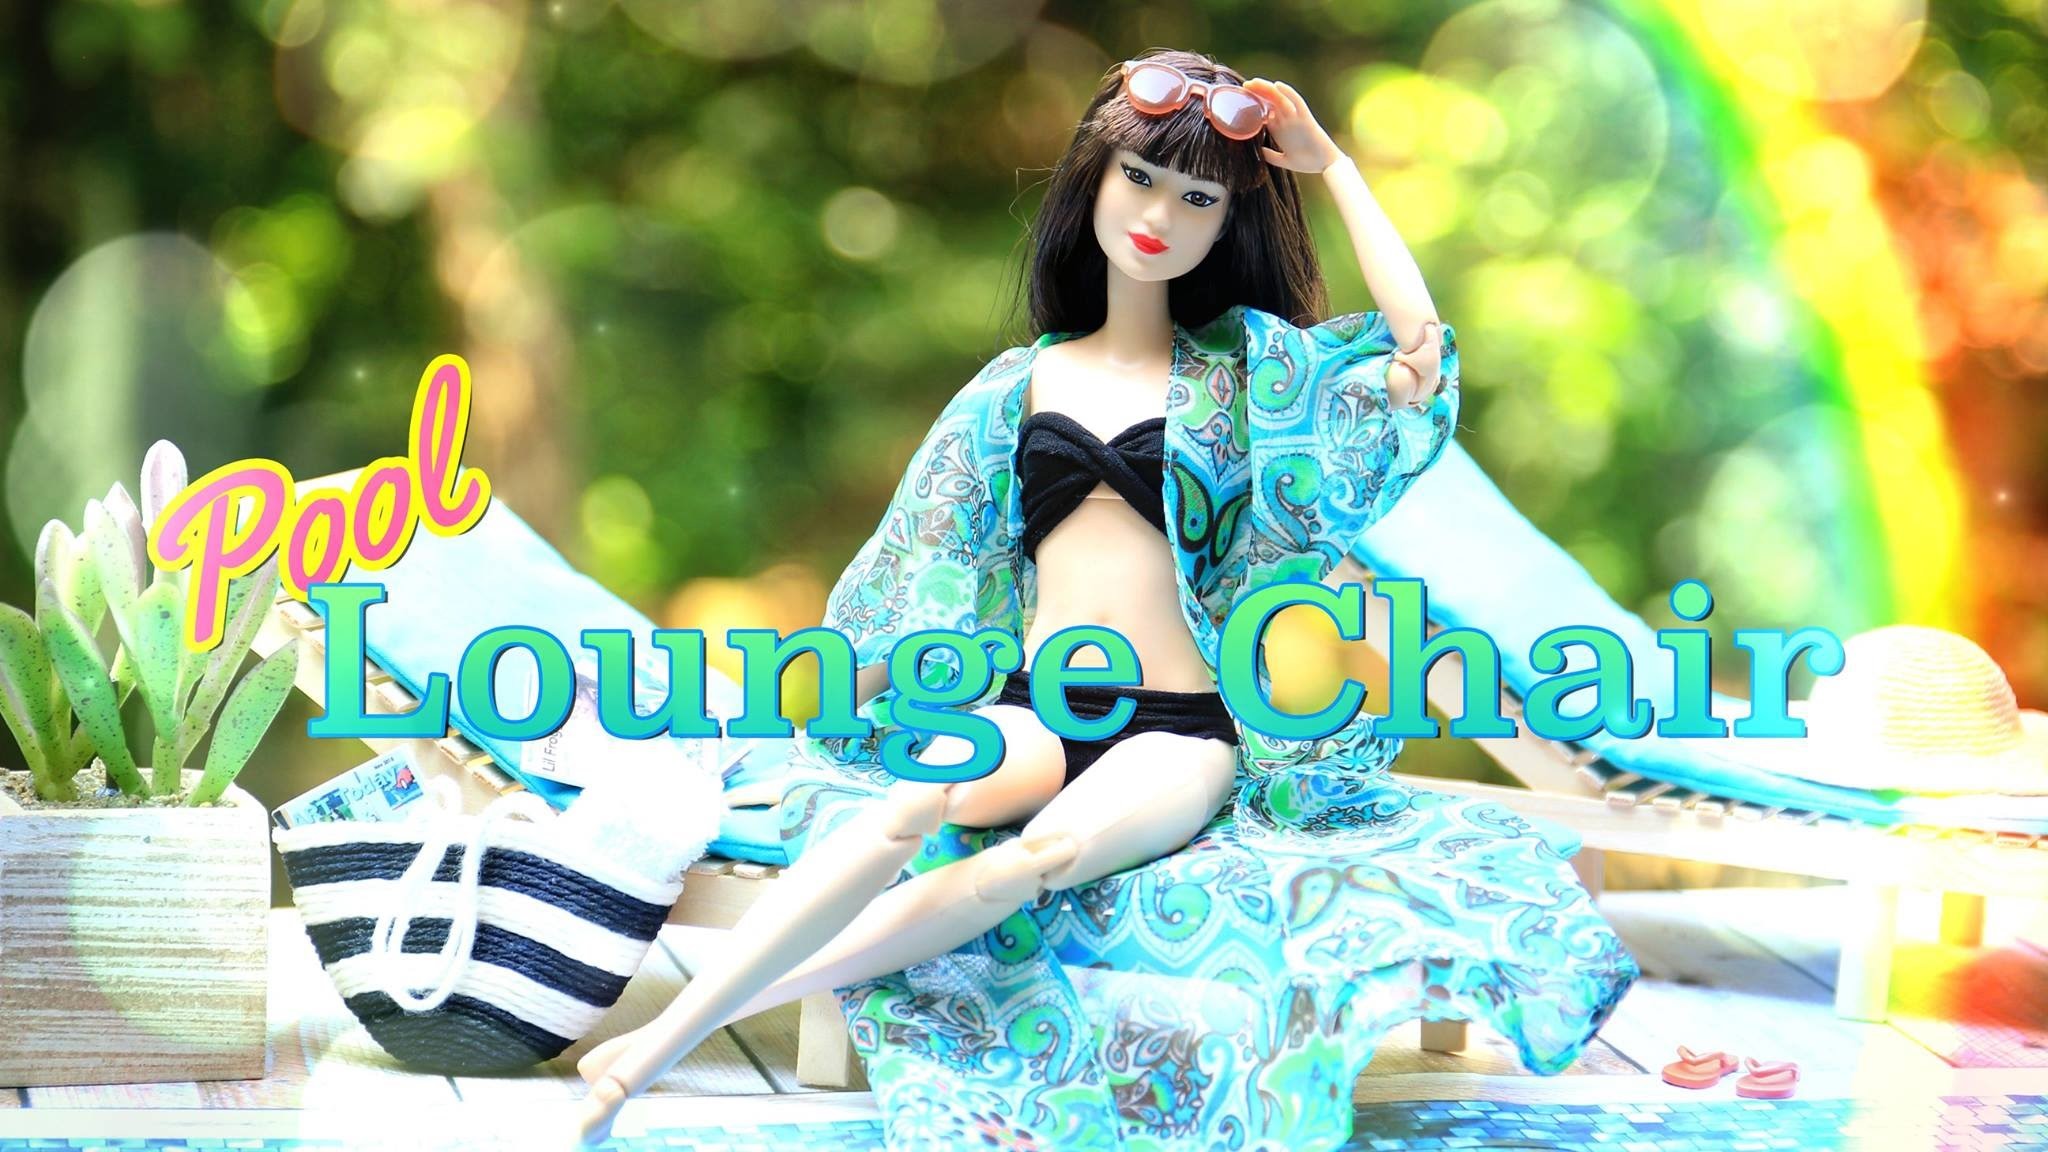 How to Make a Doll Pool Lounge Chair - Doll Crafts